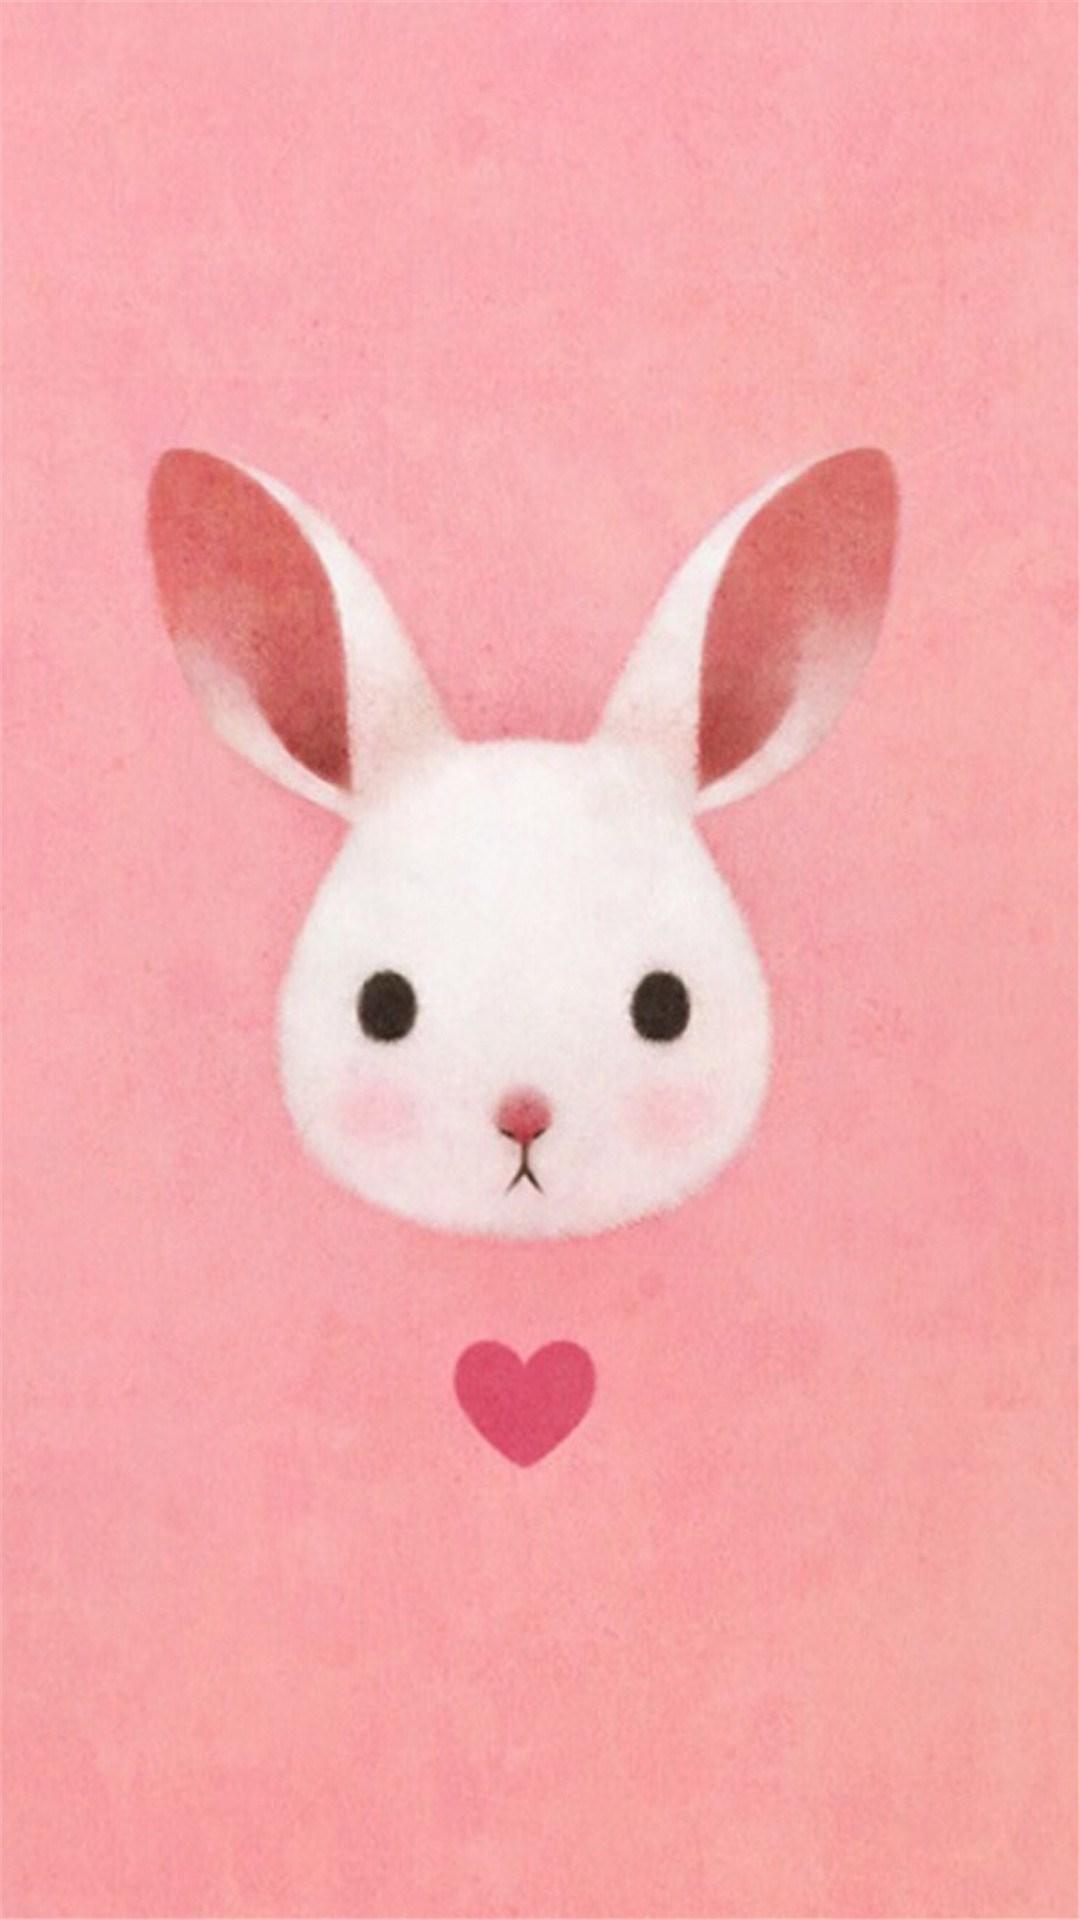 Cute Lovely Pink Rabbit Drawing Art iPhone 8 Wallpaper Free